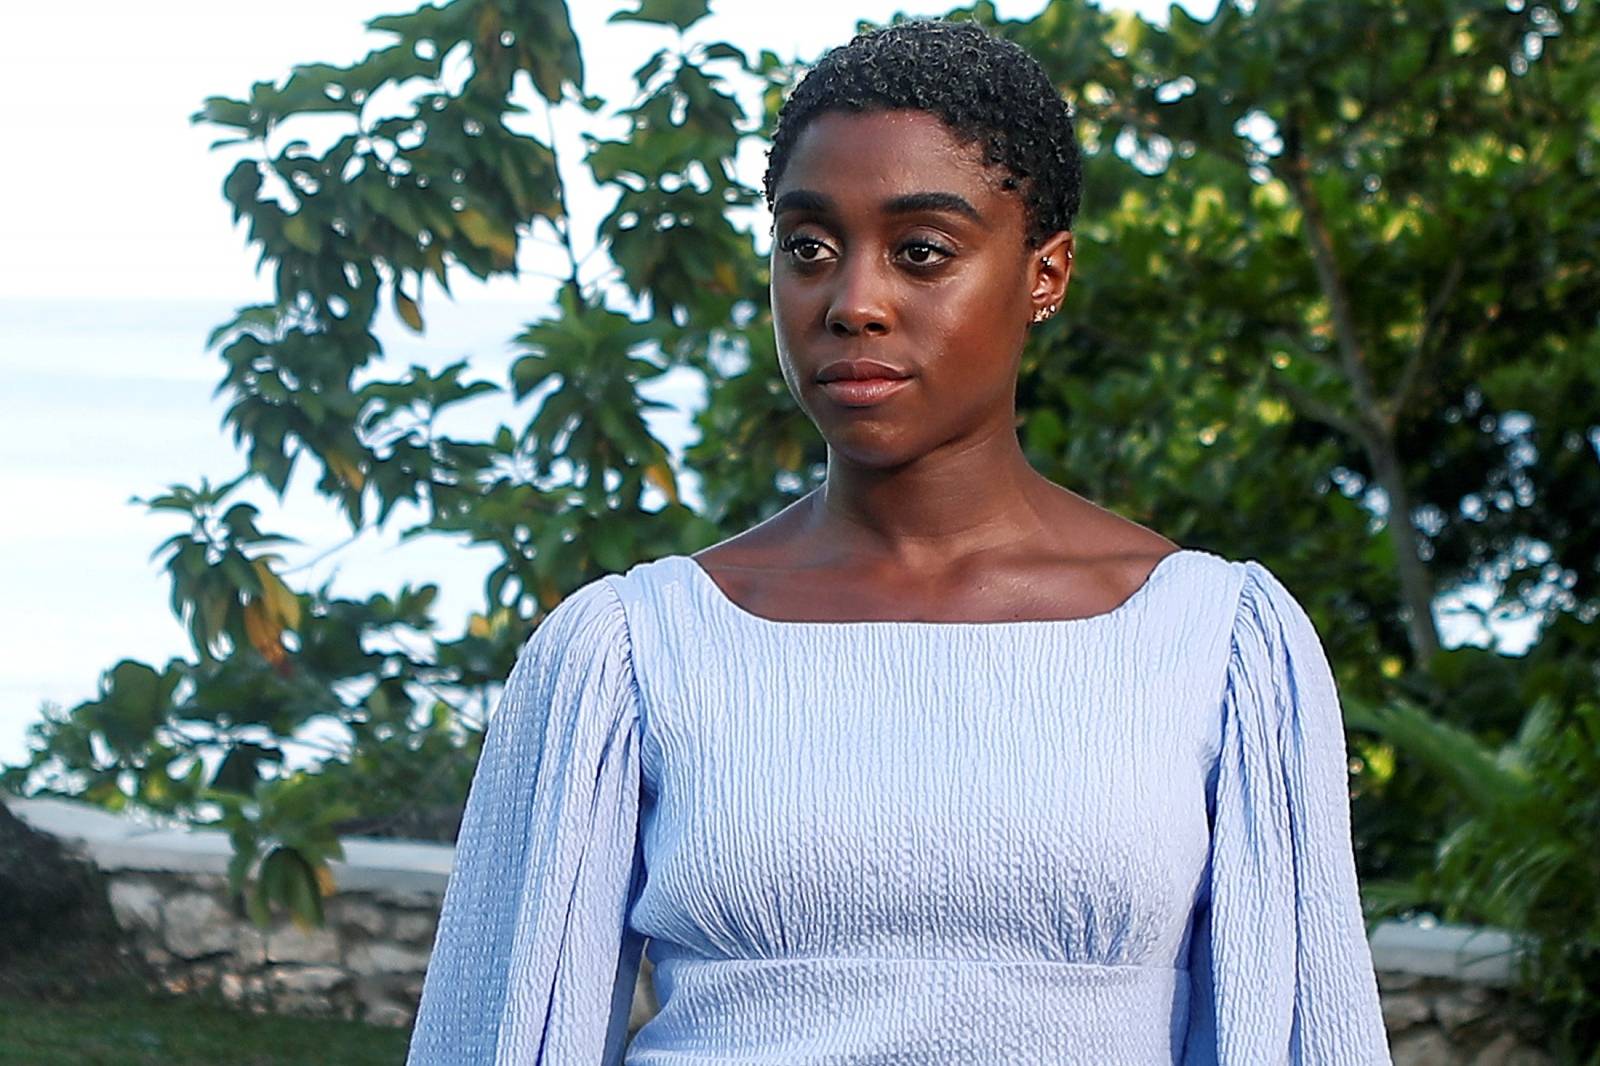 FILE PHOTO: Actor Lashana Lynch poses for a picture during a photocall for the British spy franchise's 25th film set for release next year, titled "Bond 25" in Oracabessa